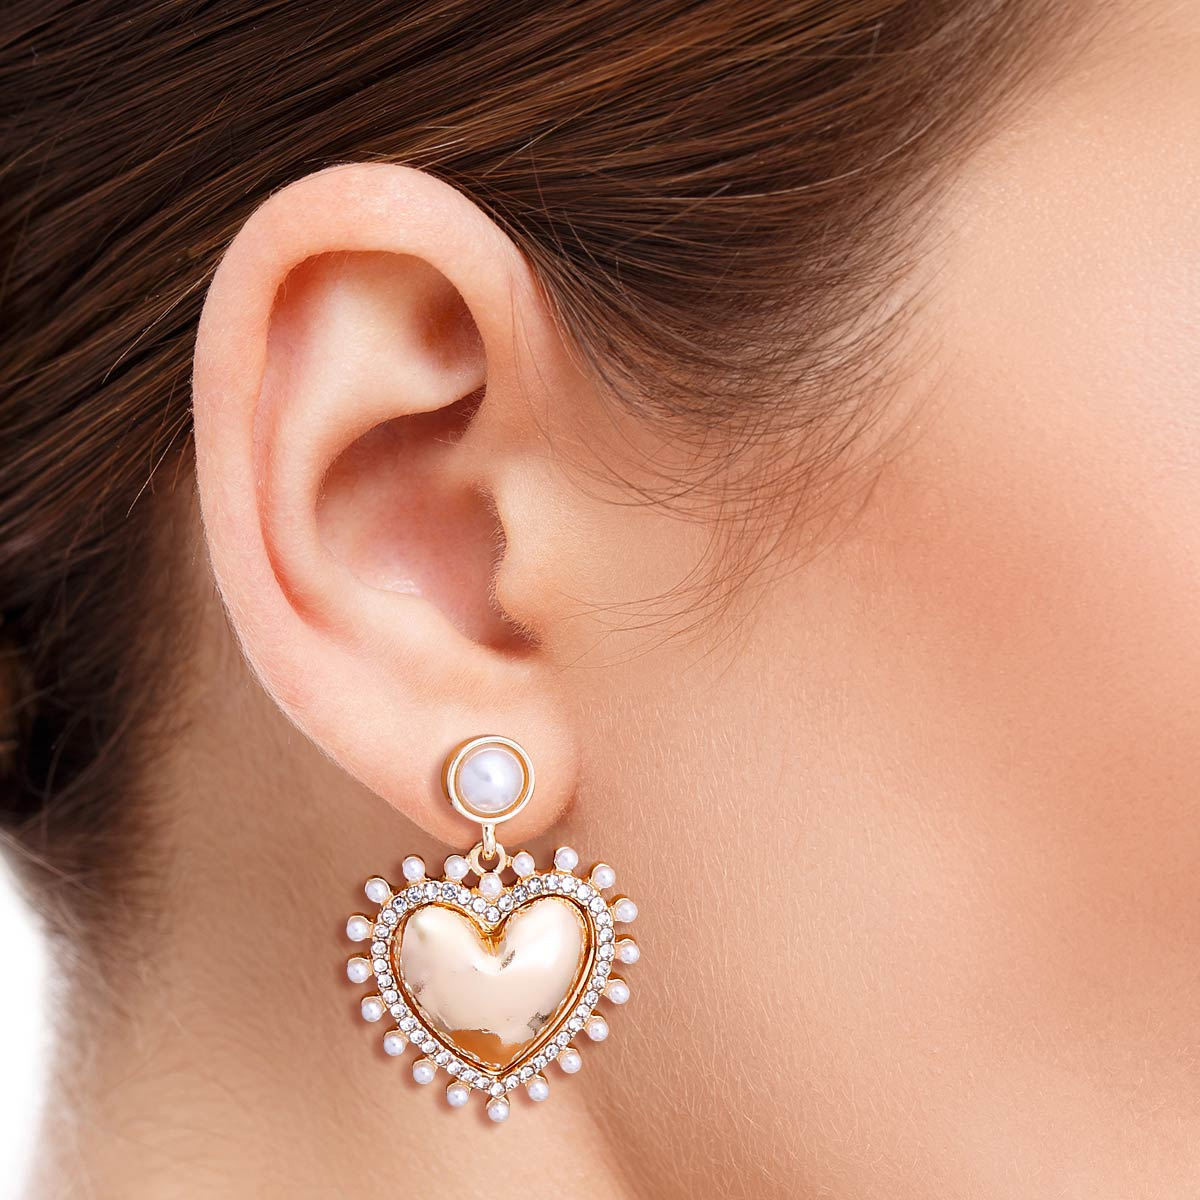 Cream Pearl and Gold Heart Earrings